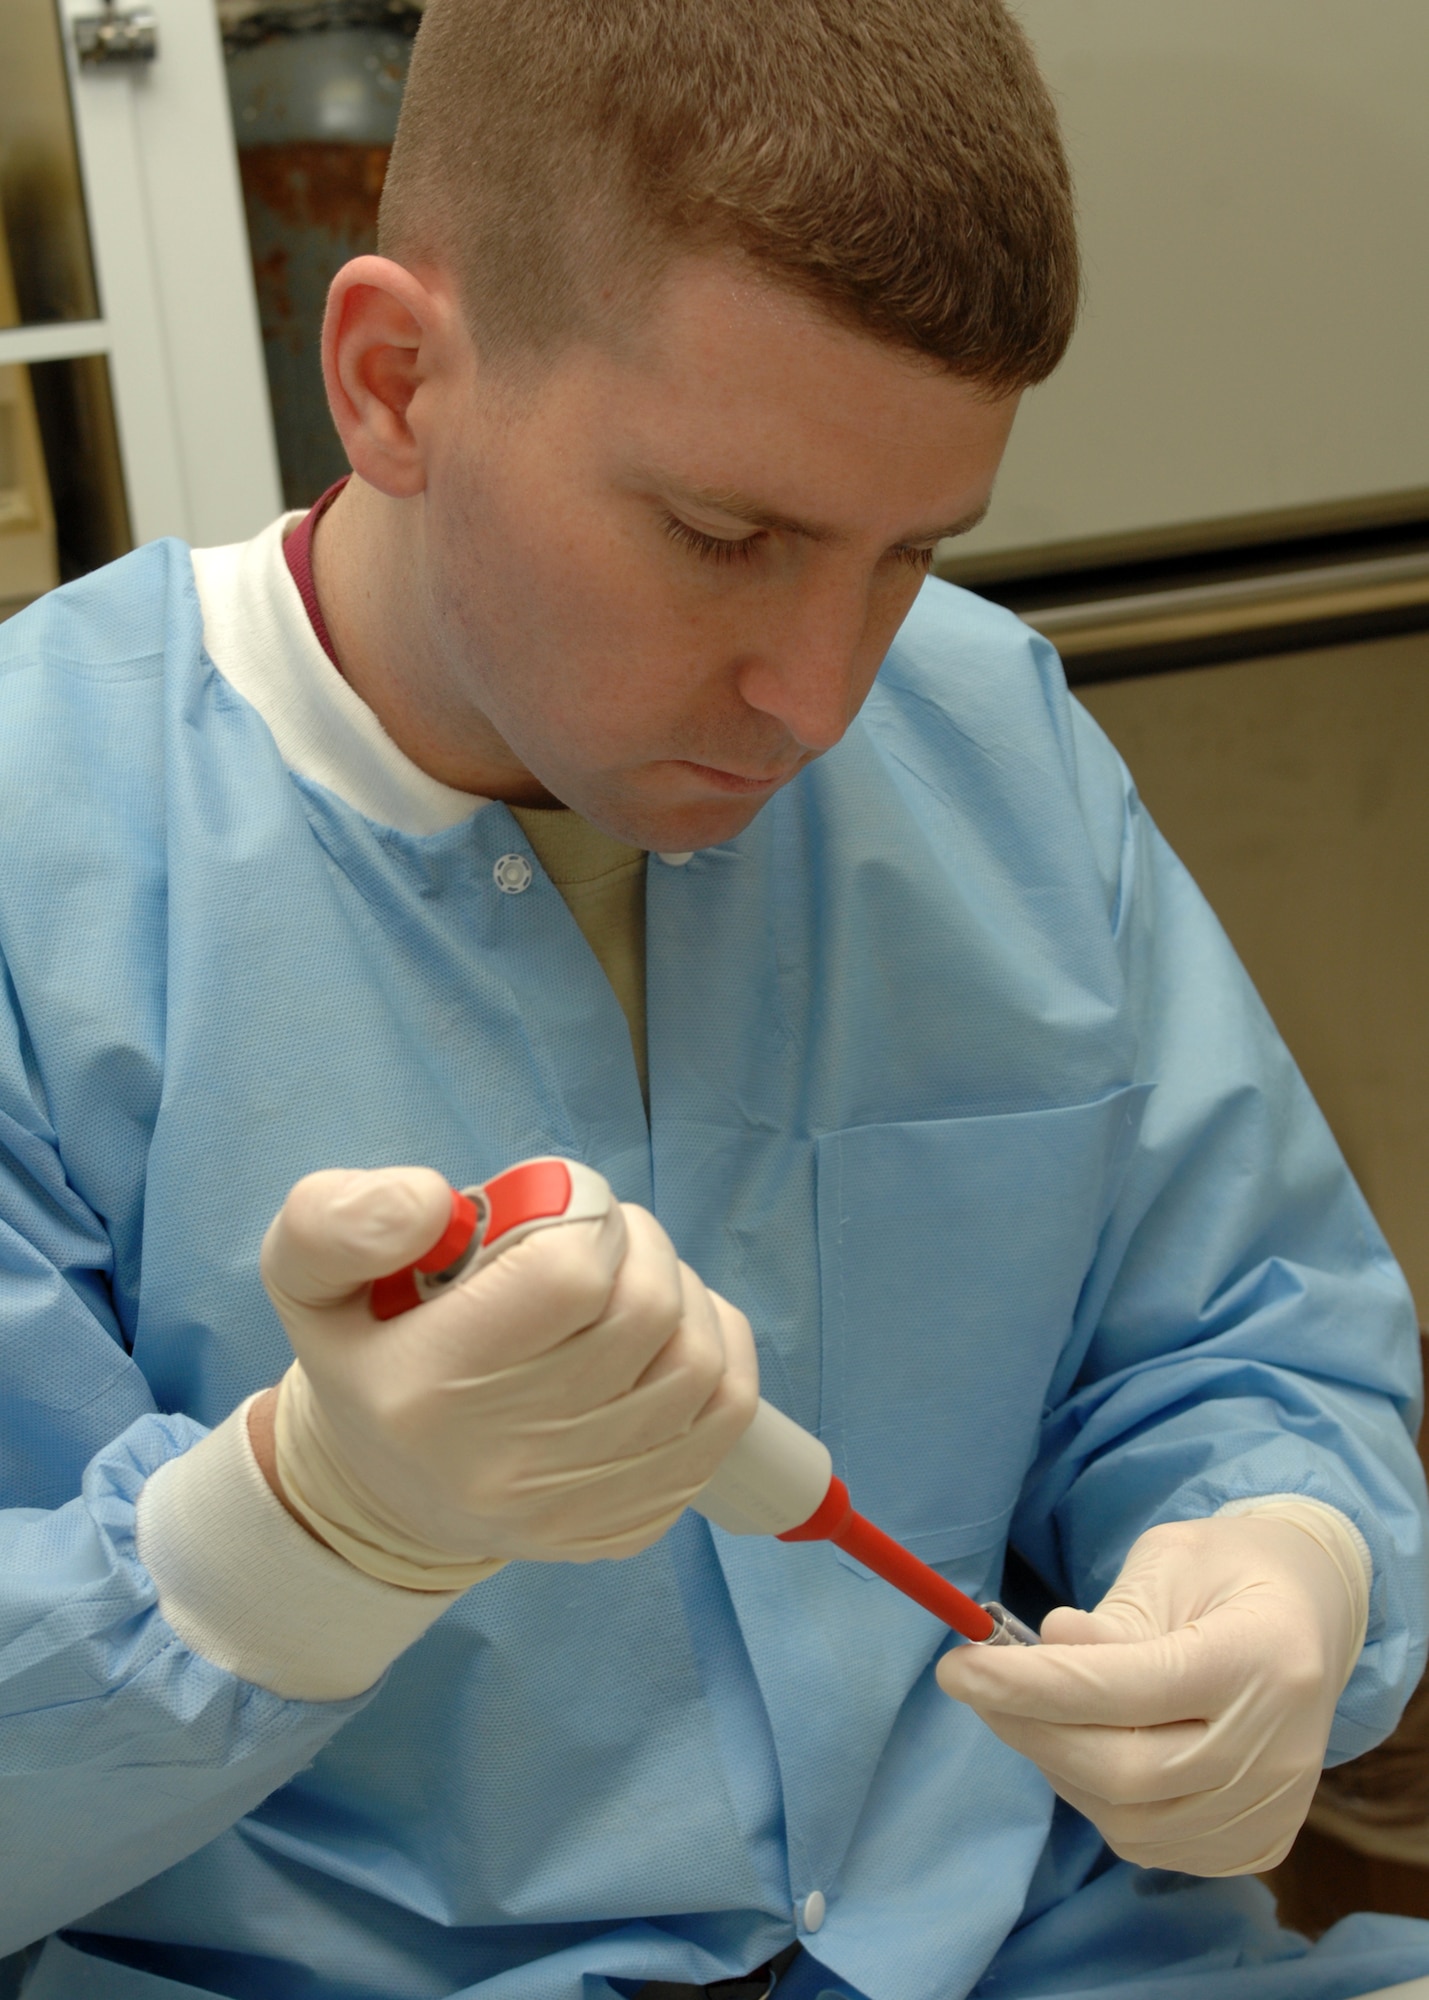 BITBURG AIR BASE, Germany- Senior Airman Justin Hamilton, 52nd Medical Support Squadron, tests various bacteria samples at the Bitburg Laboratory April 15, 2008. The Bitburg Lab tests for all hematology, chemistry and microbiology abnormalities. National Medical Laboratory Professionals Week takes place April 20-26. (U.S. Air Force photo/Airman 1st Class Jenifer Calhoun)